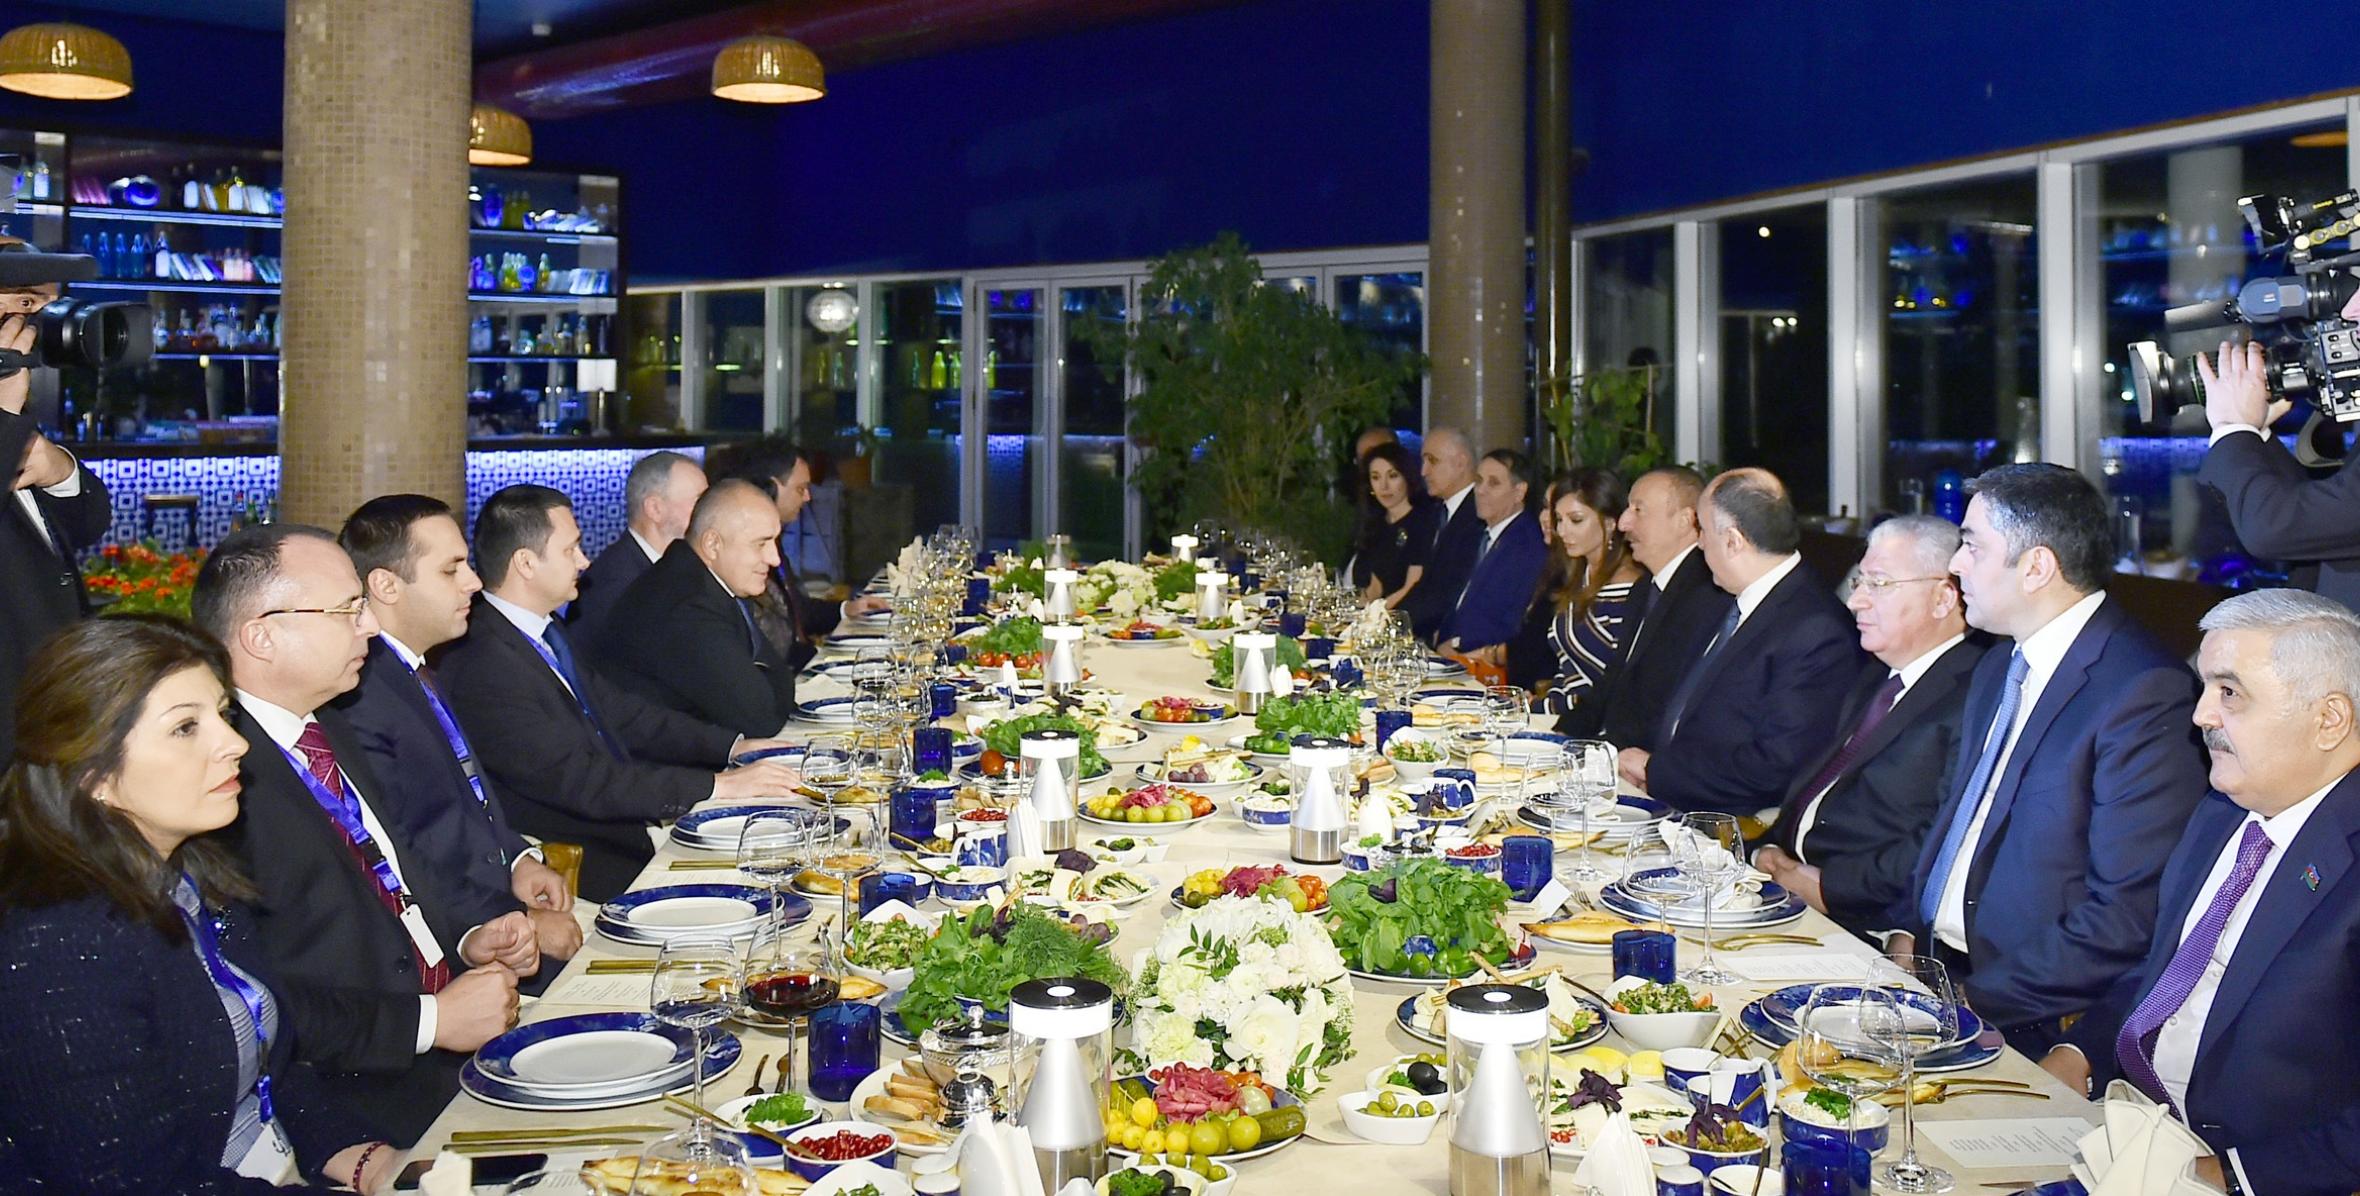 Ilham Aliyev and Prime Minister Boyko Borisov dined together